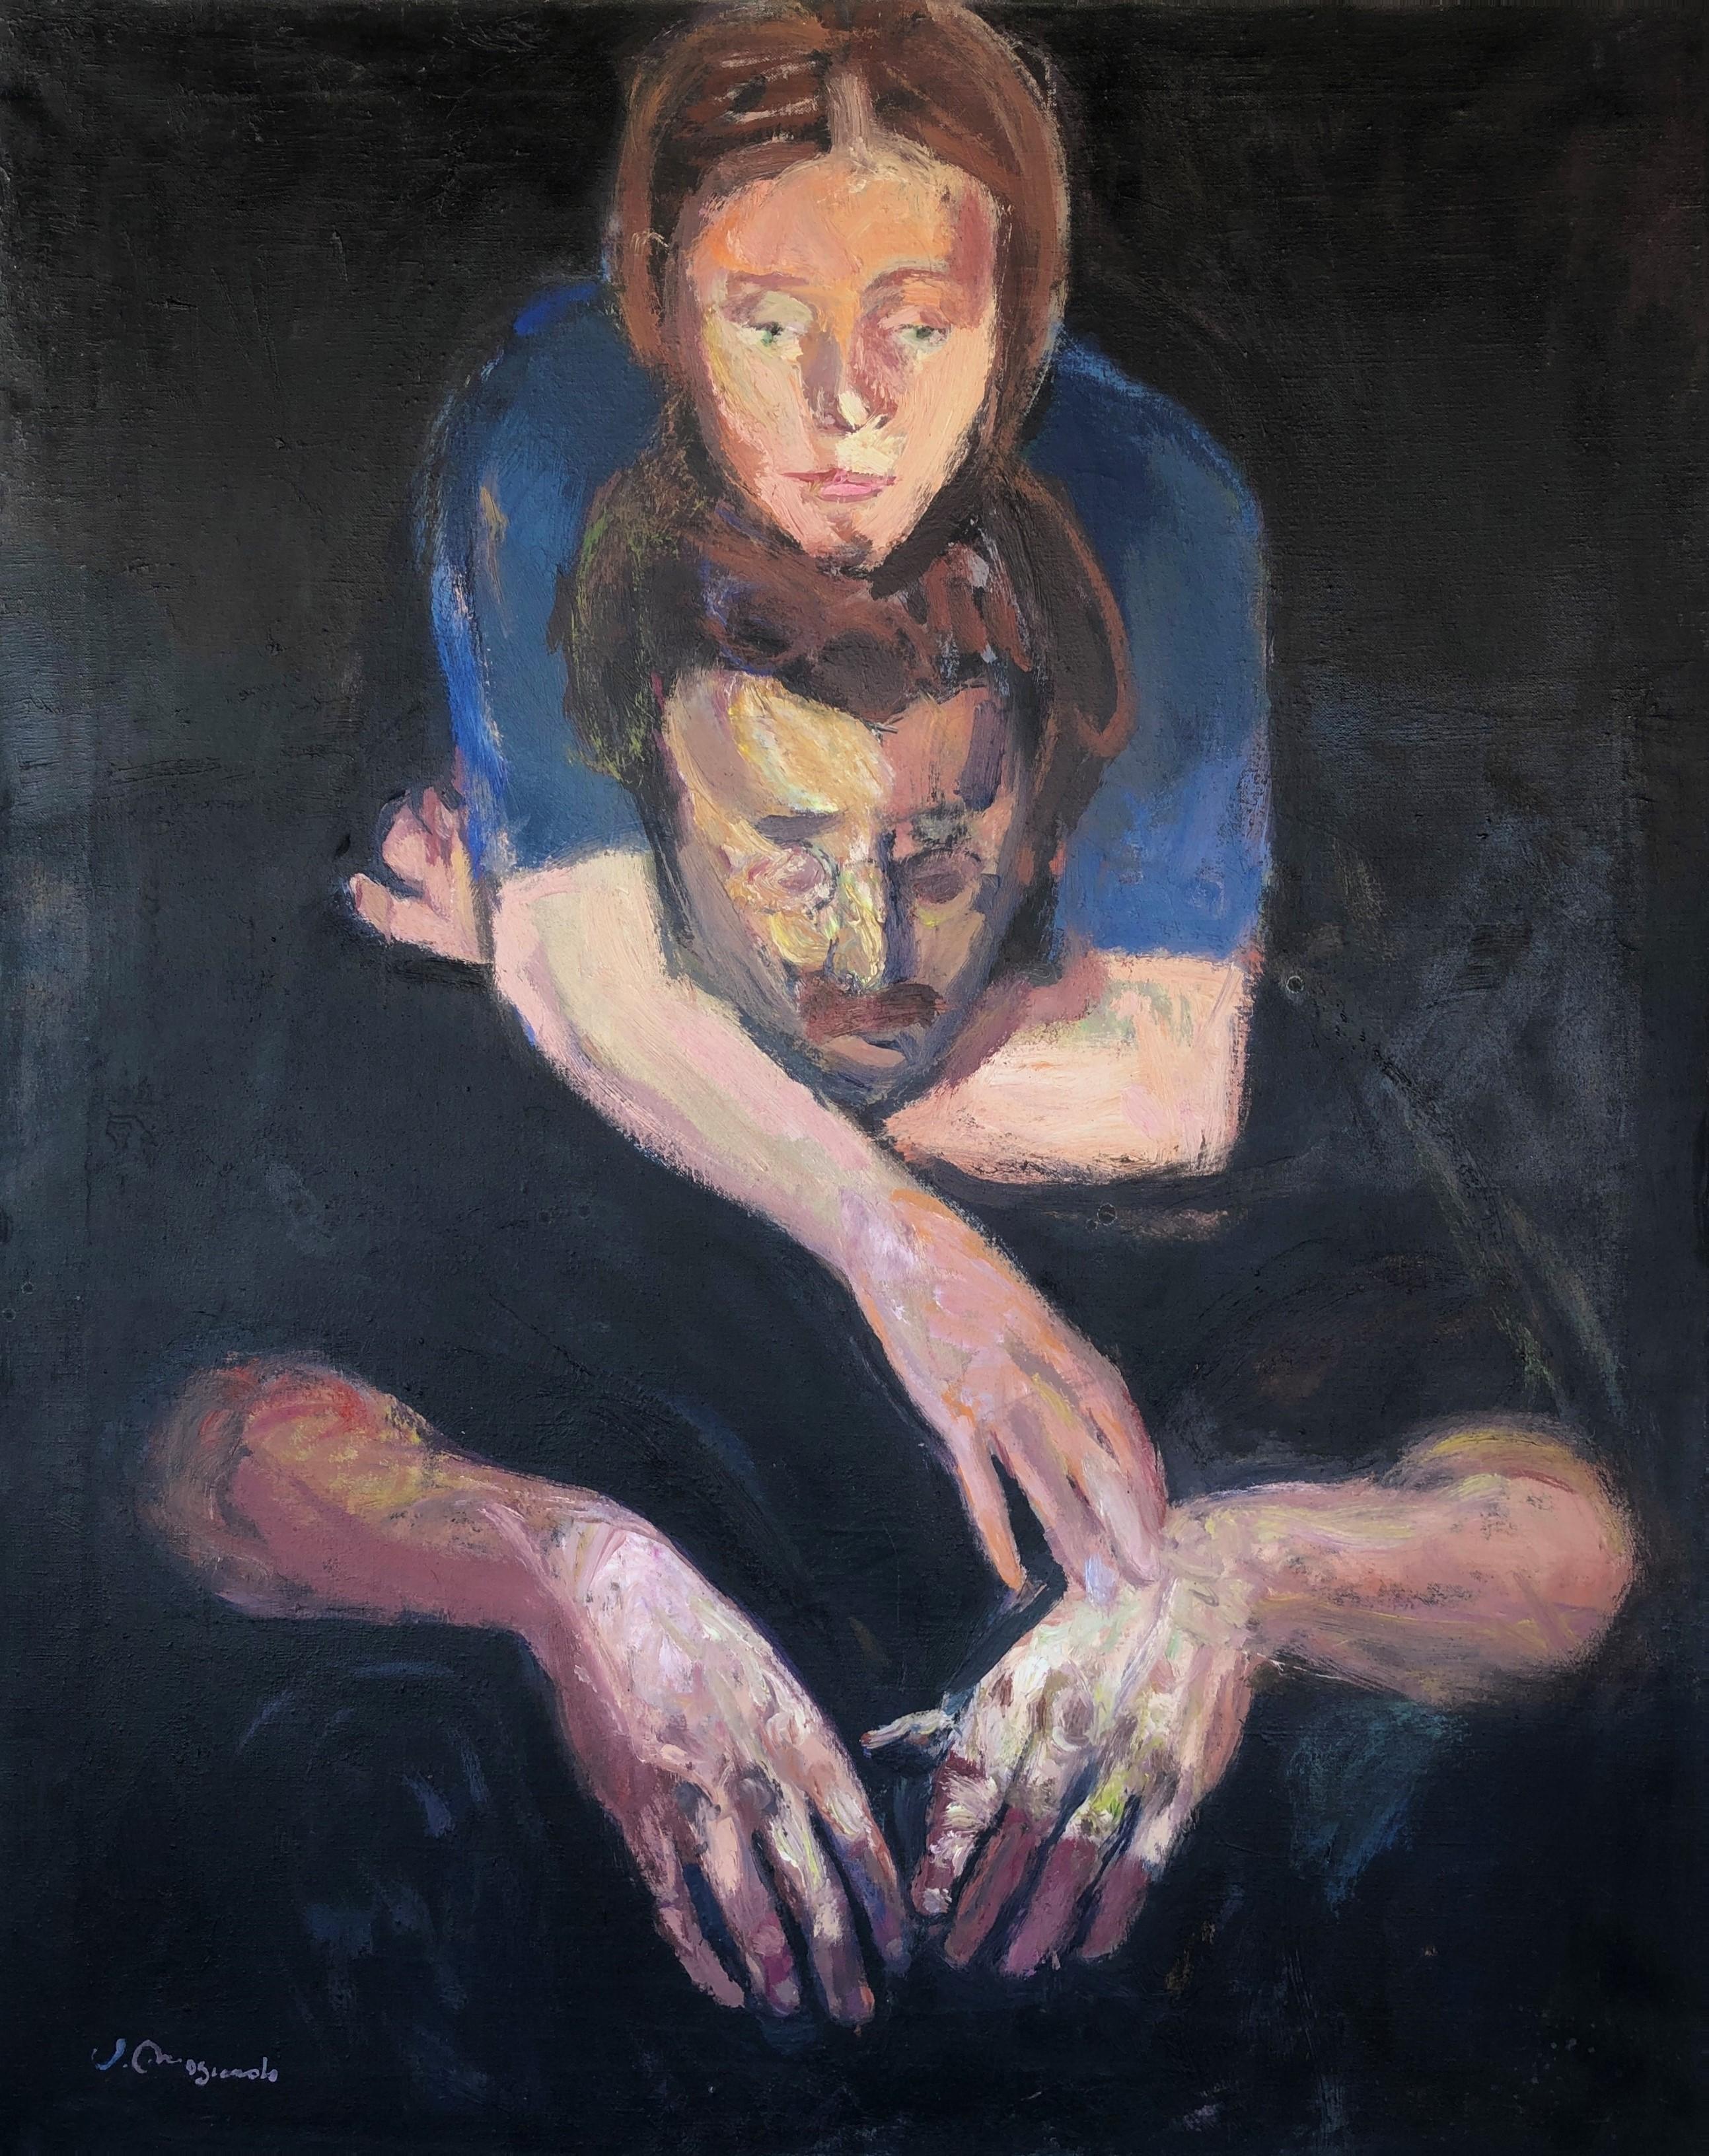 Josep Moscardo Portrait Painting - self portrait with woman oil on canvas painting